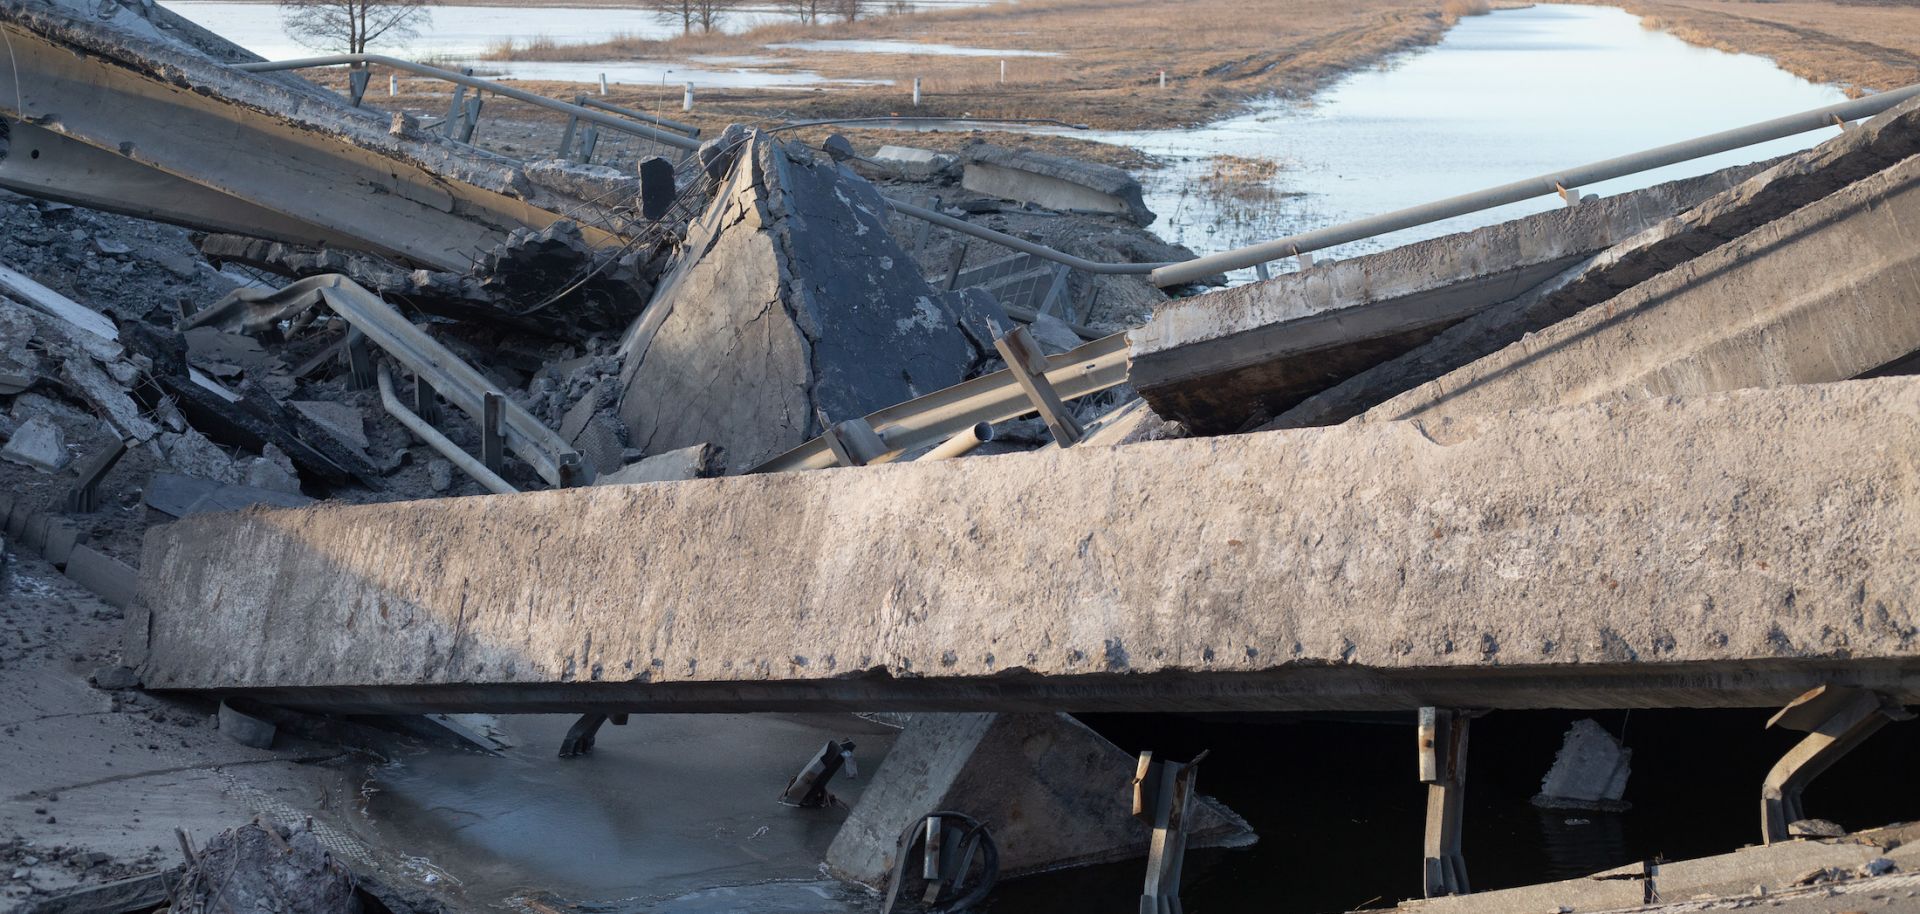 A general view of a destroyed bridge on March 11, 2022 in Borshchiv, Ukraine. Russia continues its assault on Ukraine's major cities, including the capital Kyiv, after launching a large-scale invasion of the country on Feb. 24.